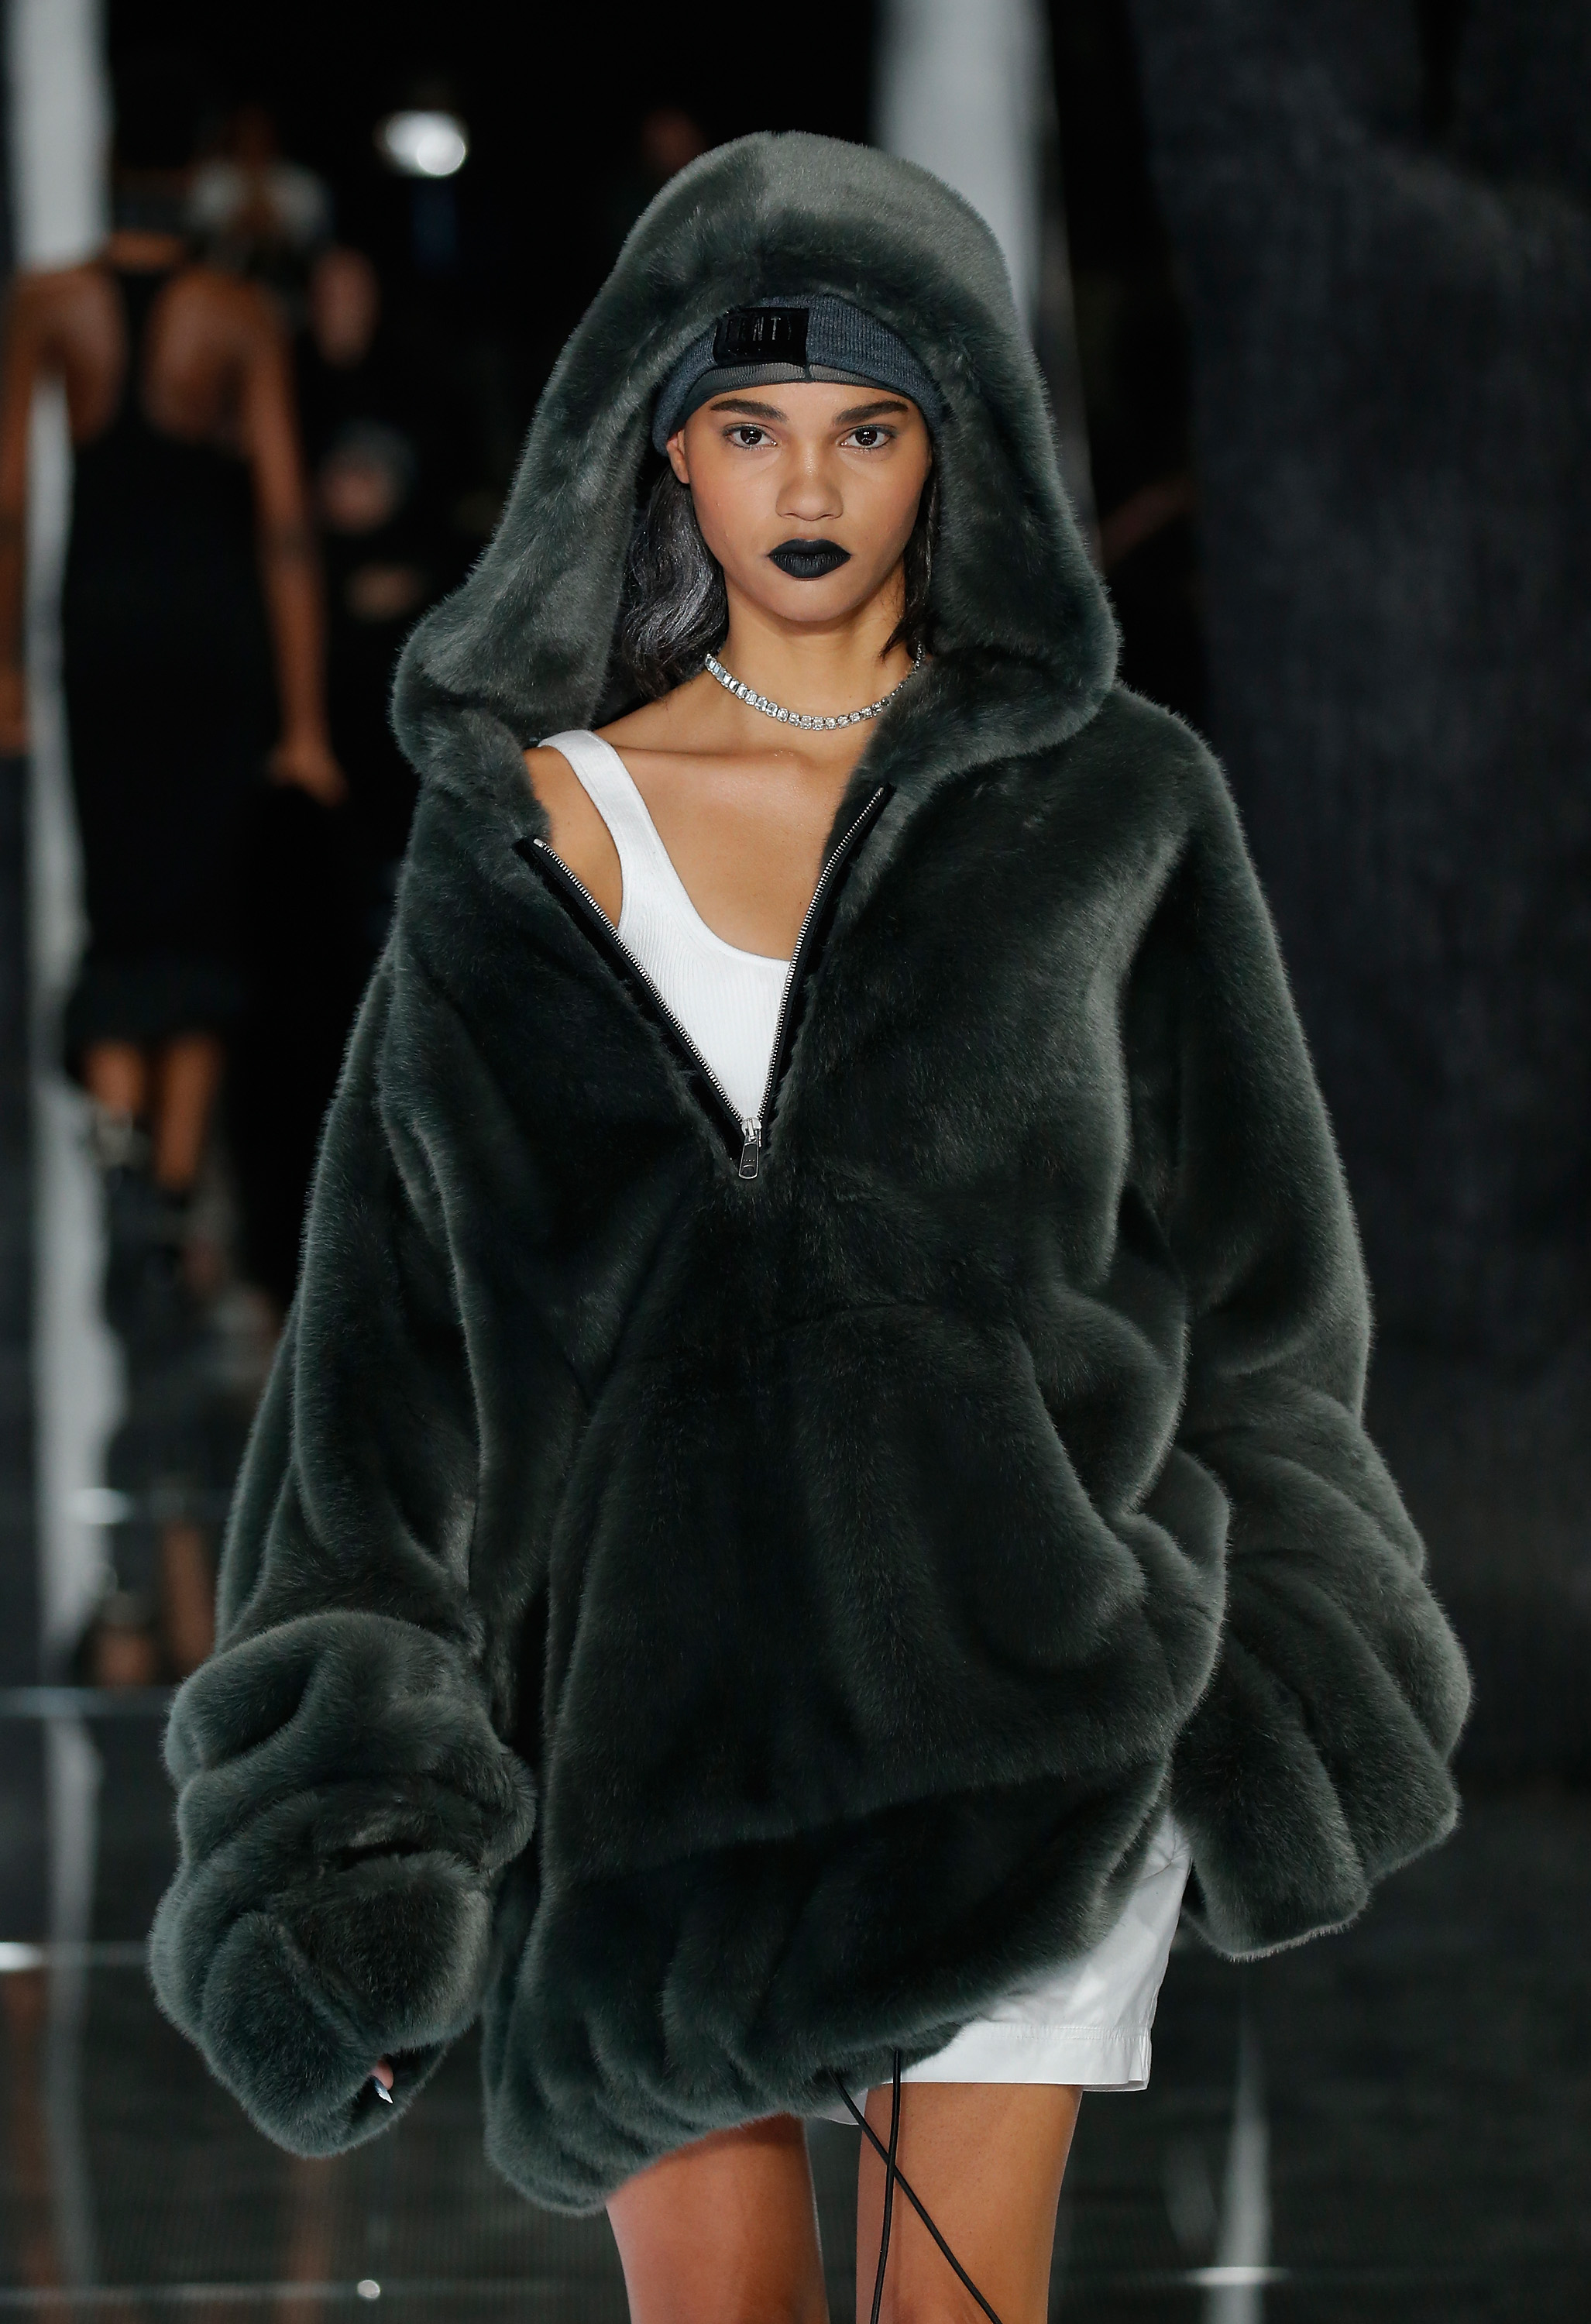  (Photo by JP Yim/Getty Images for FENTY PUMA)